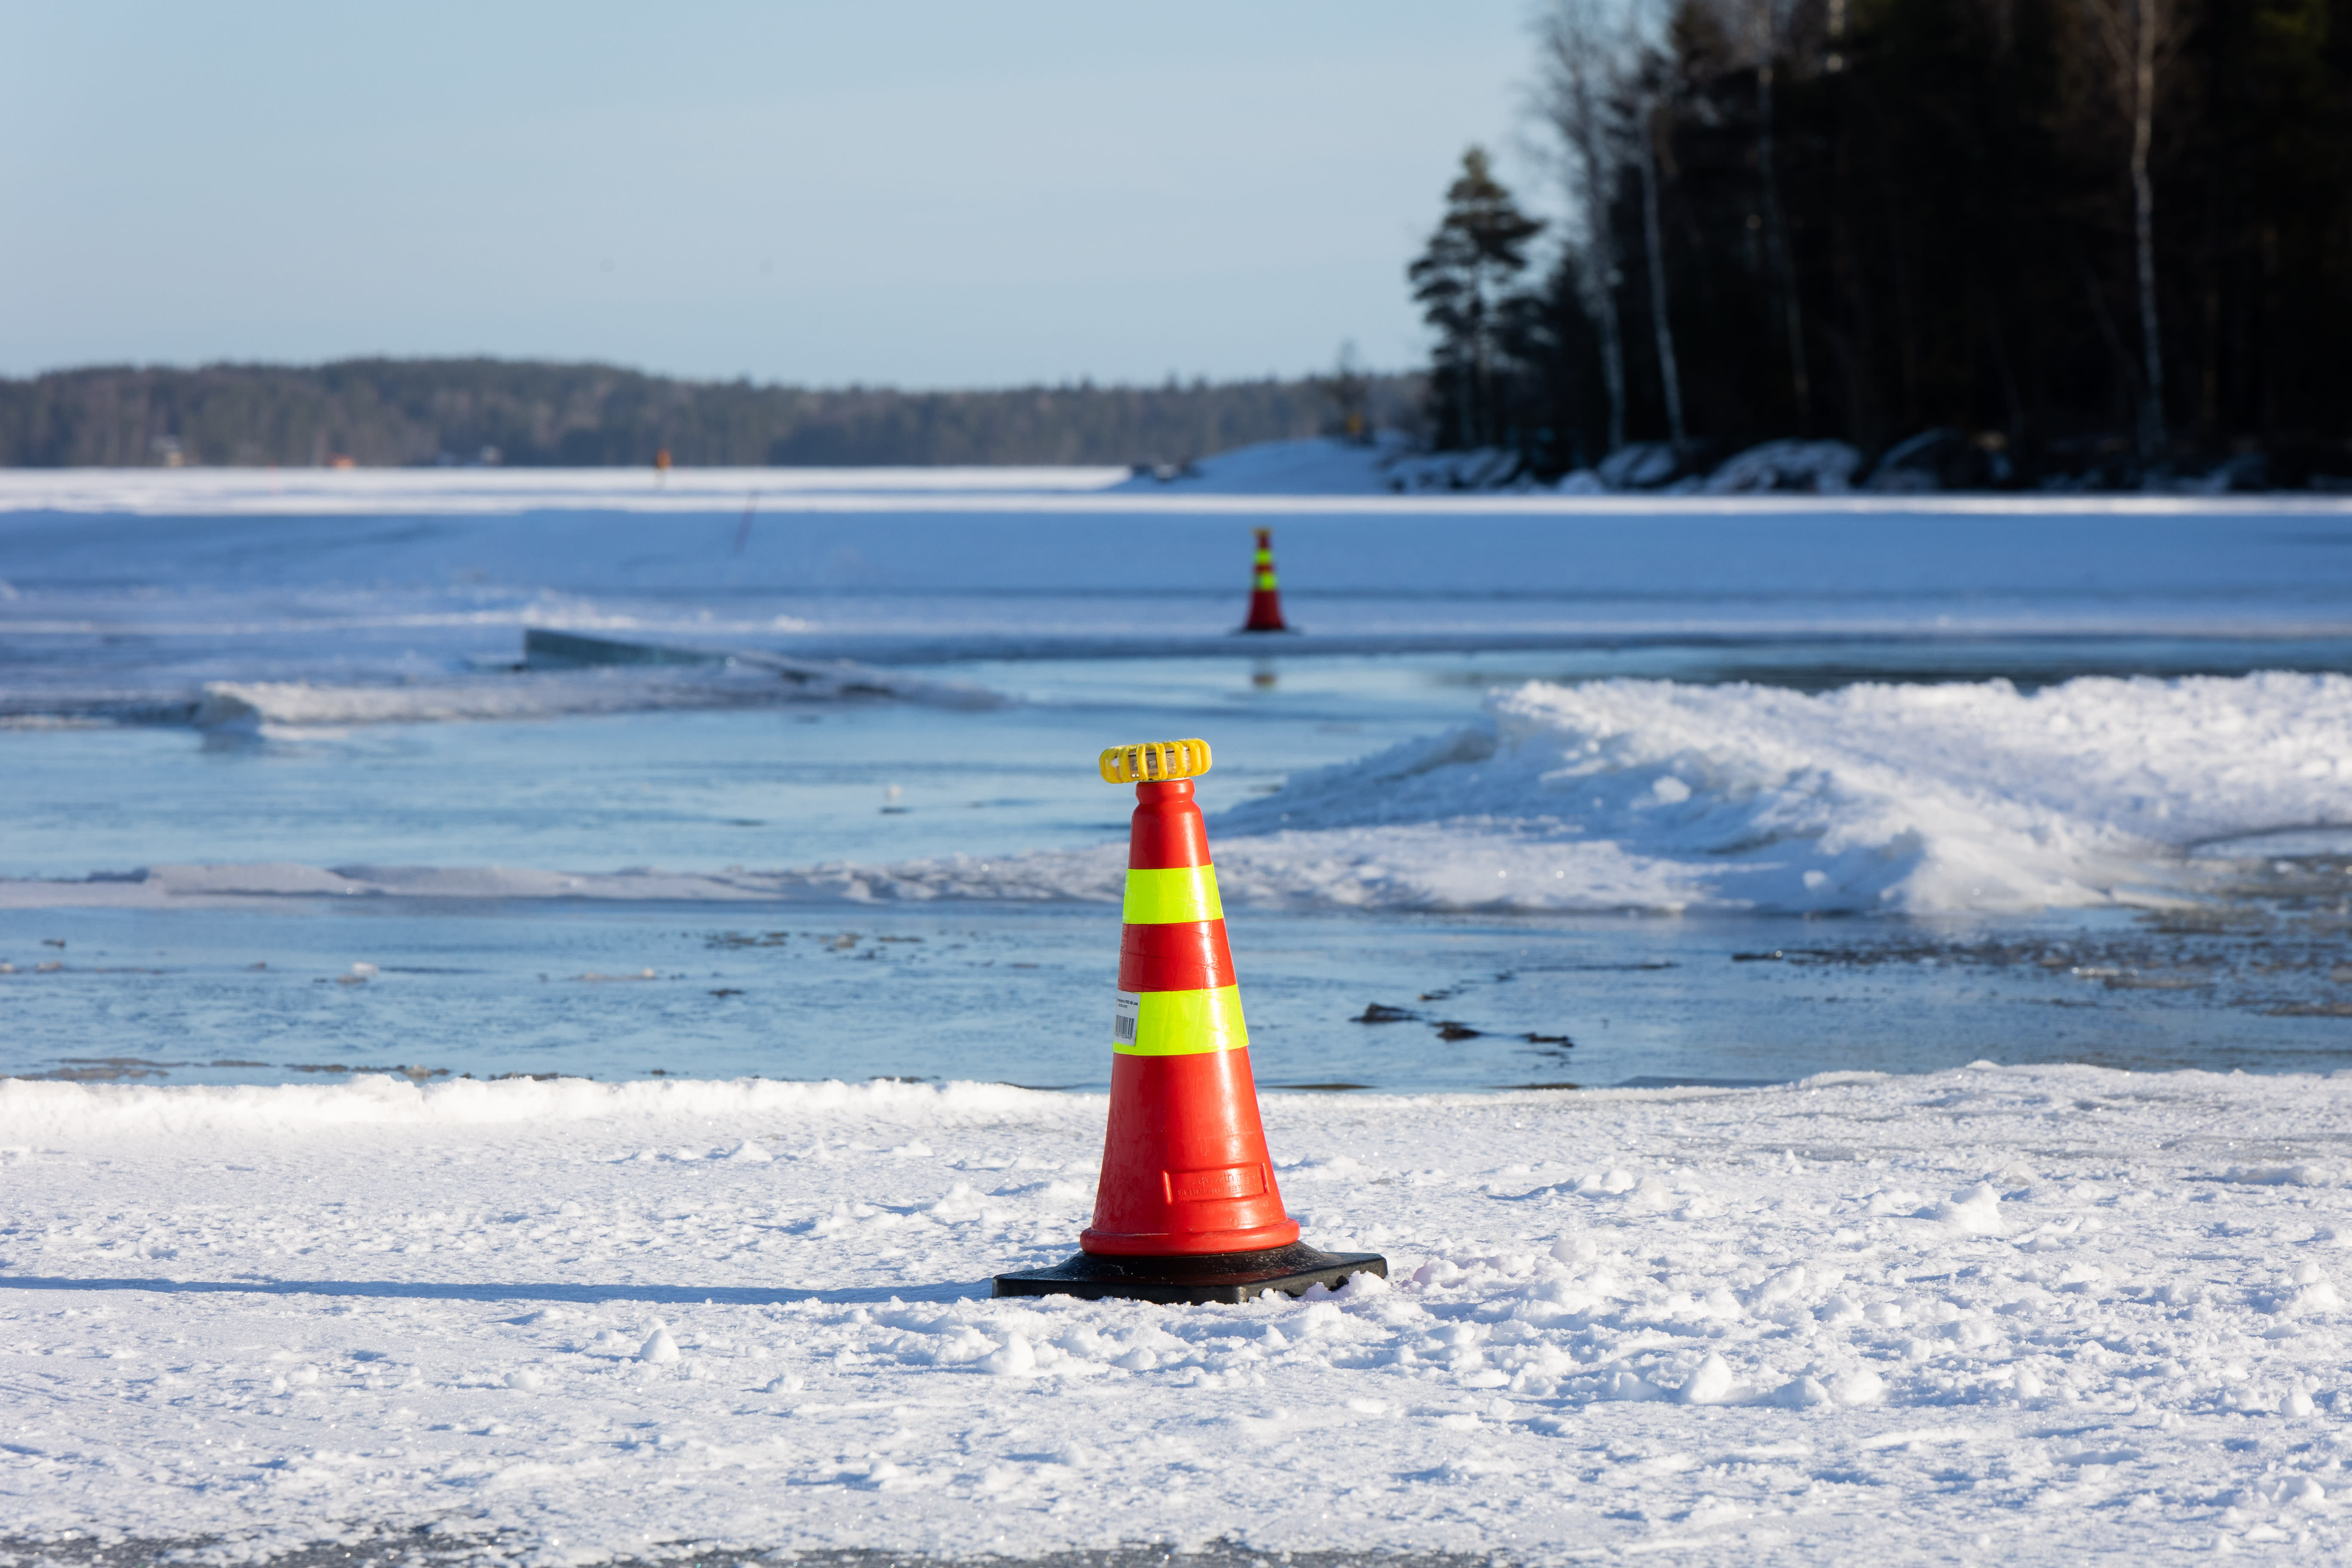 Finnish lake ice is thinner than usual, experts warn